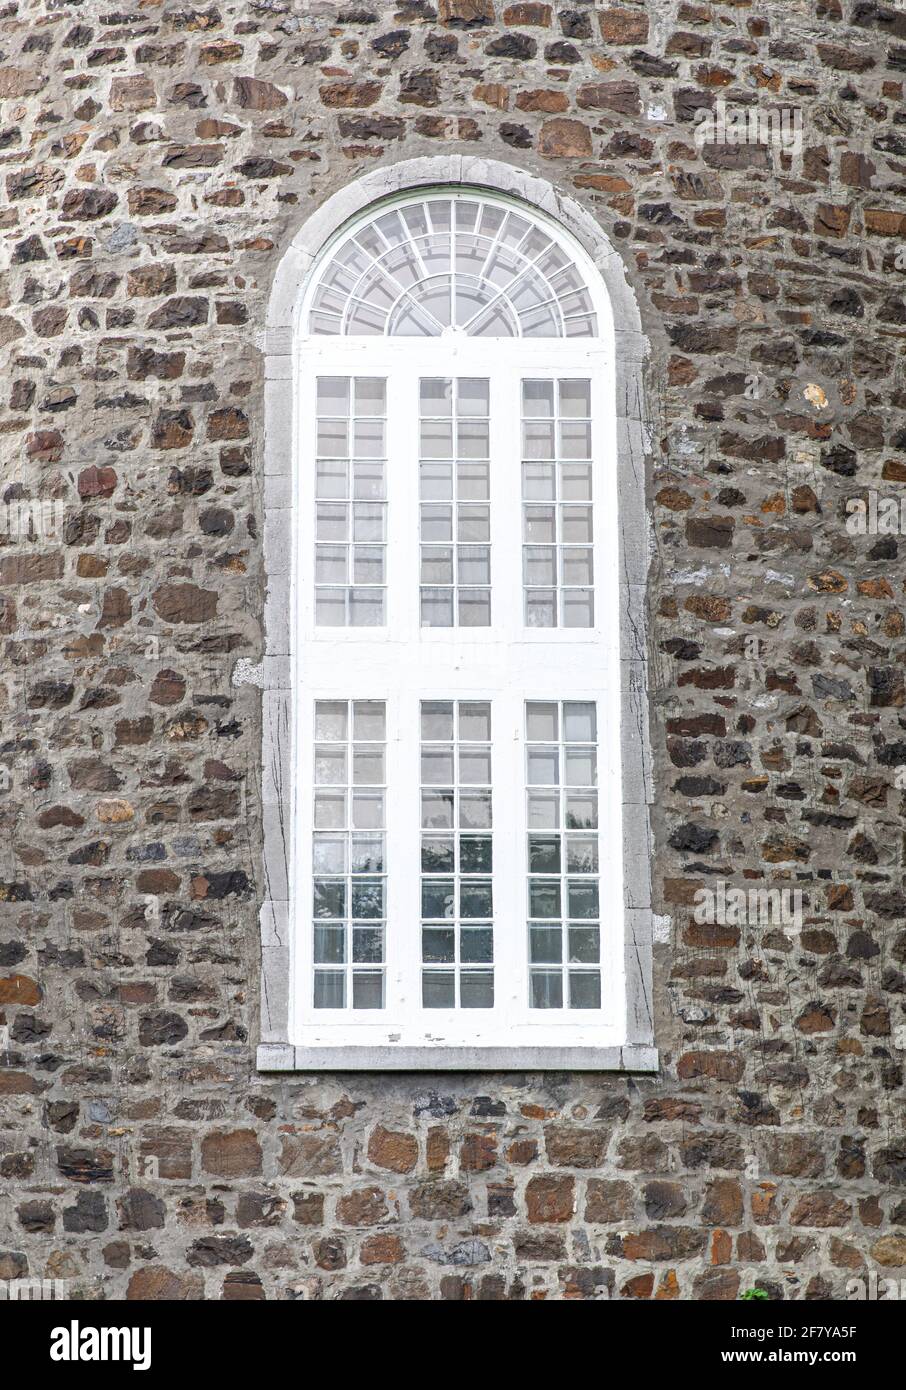 Tall window with arched top in the center of a stone wall Stock Photo